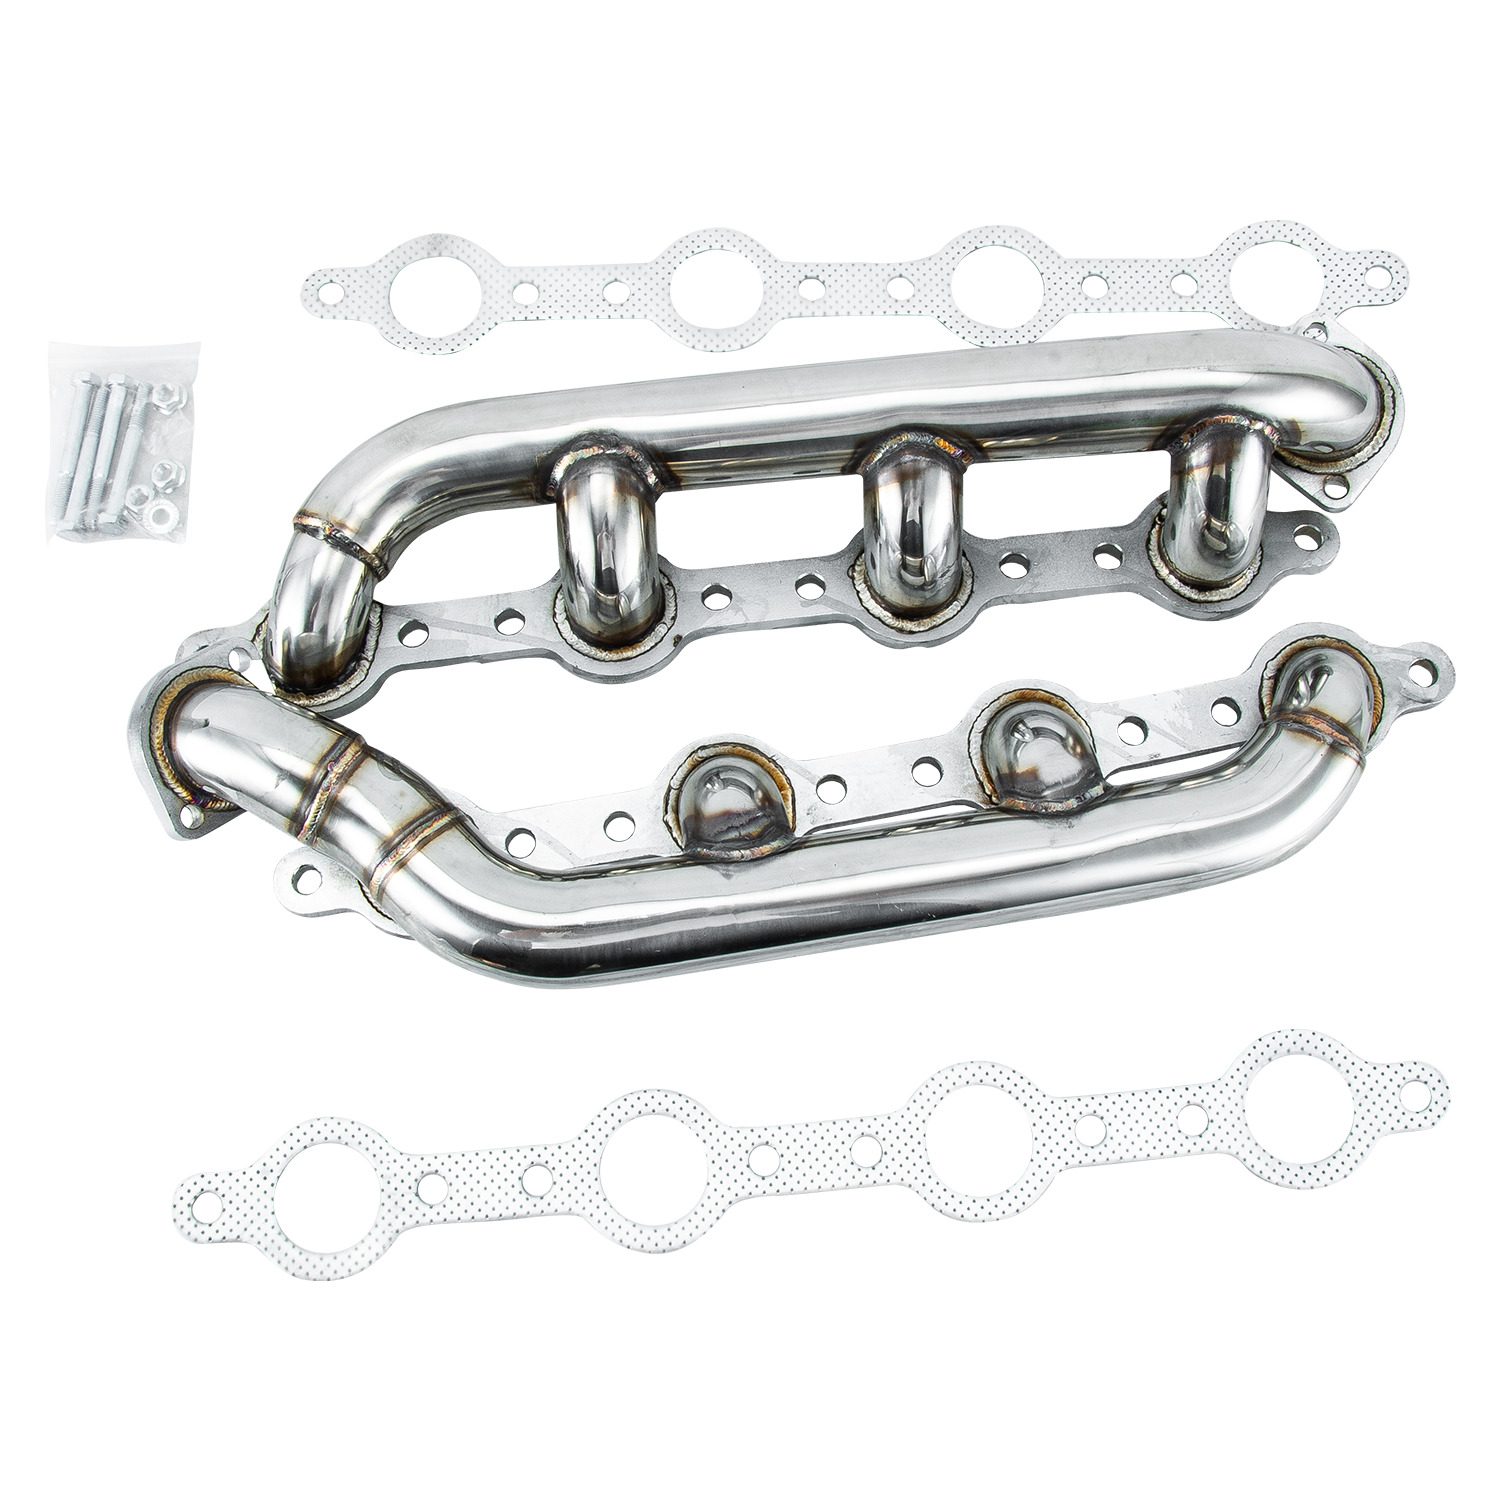 For 1999-2003 2002 Ford F250 F350 F450 Stainless Steel Headers Manifolds New